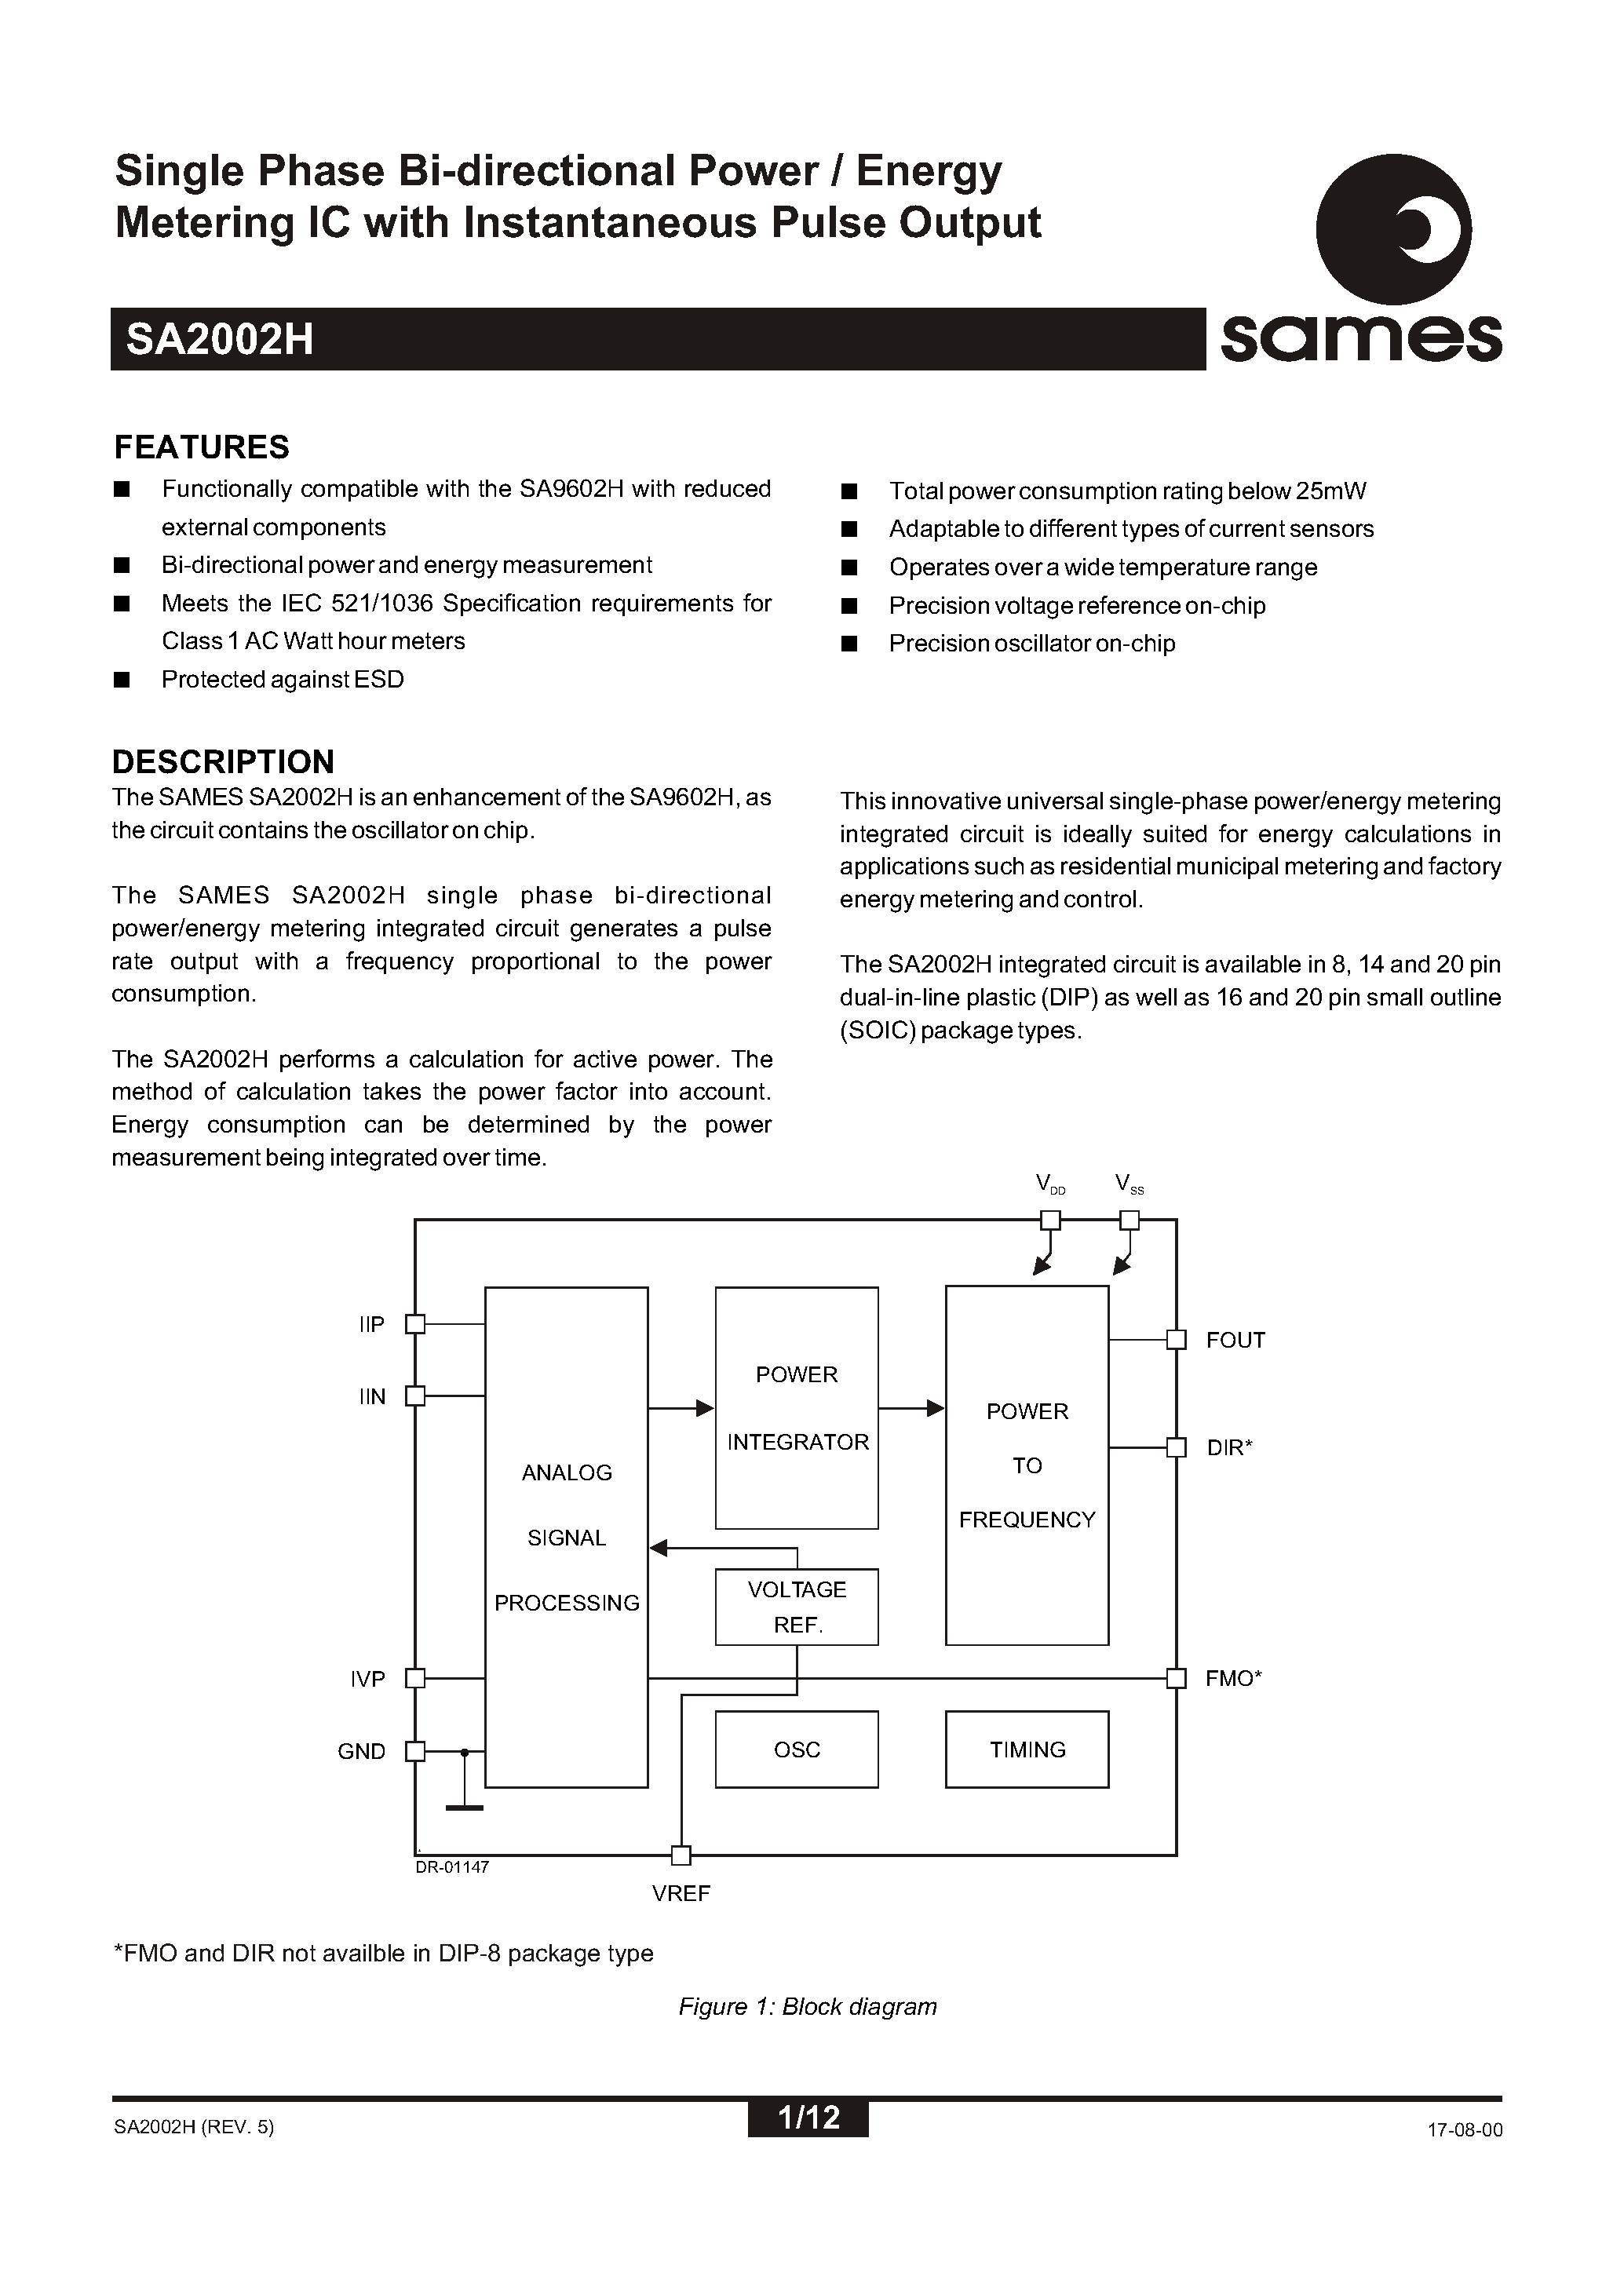 Datasheet SA2002HPA - Single Phase Bi-directional Power / Energy Metering IC with Instantaneous Pulse Output page 1